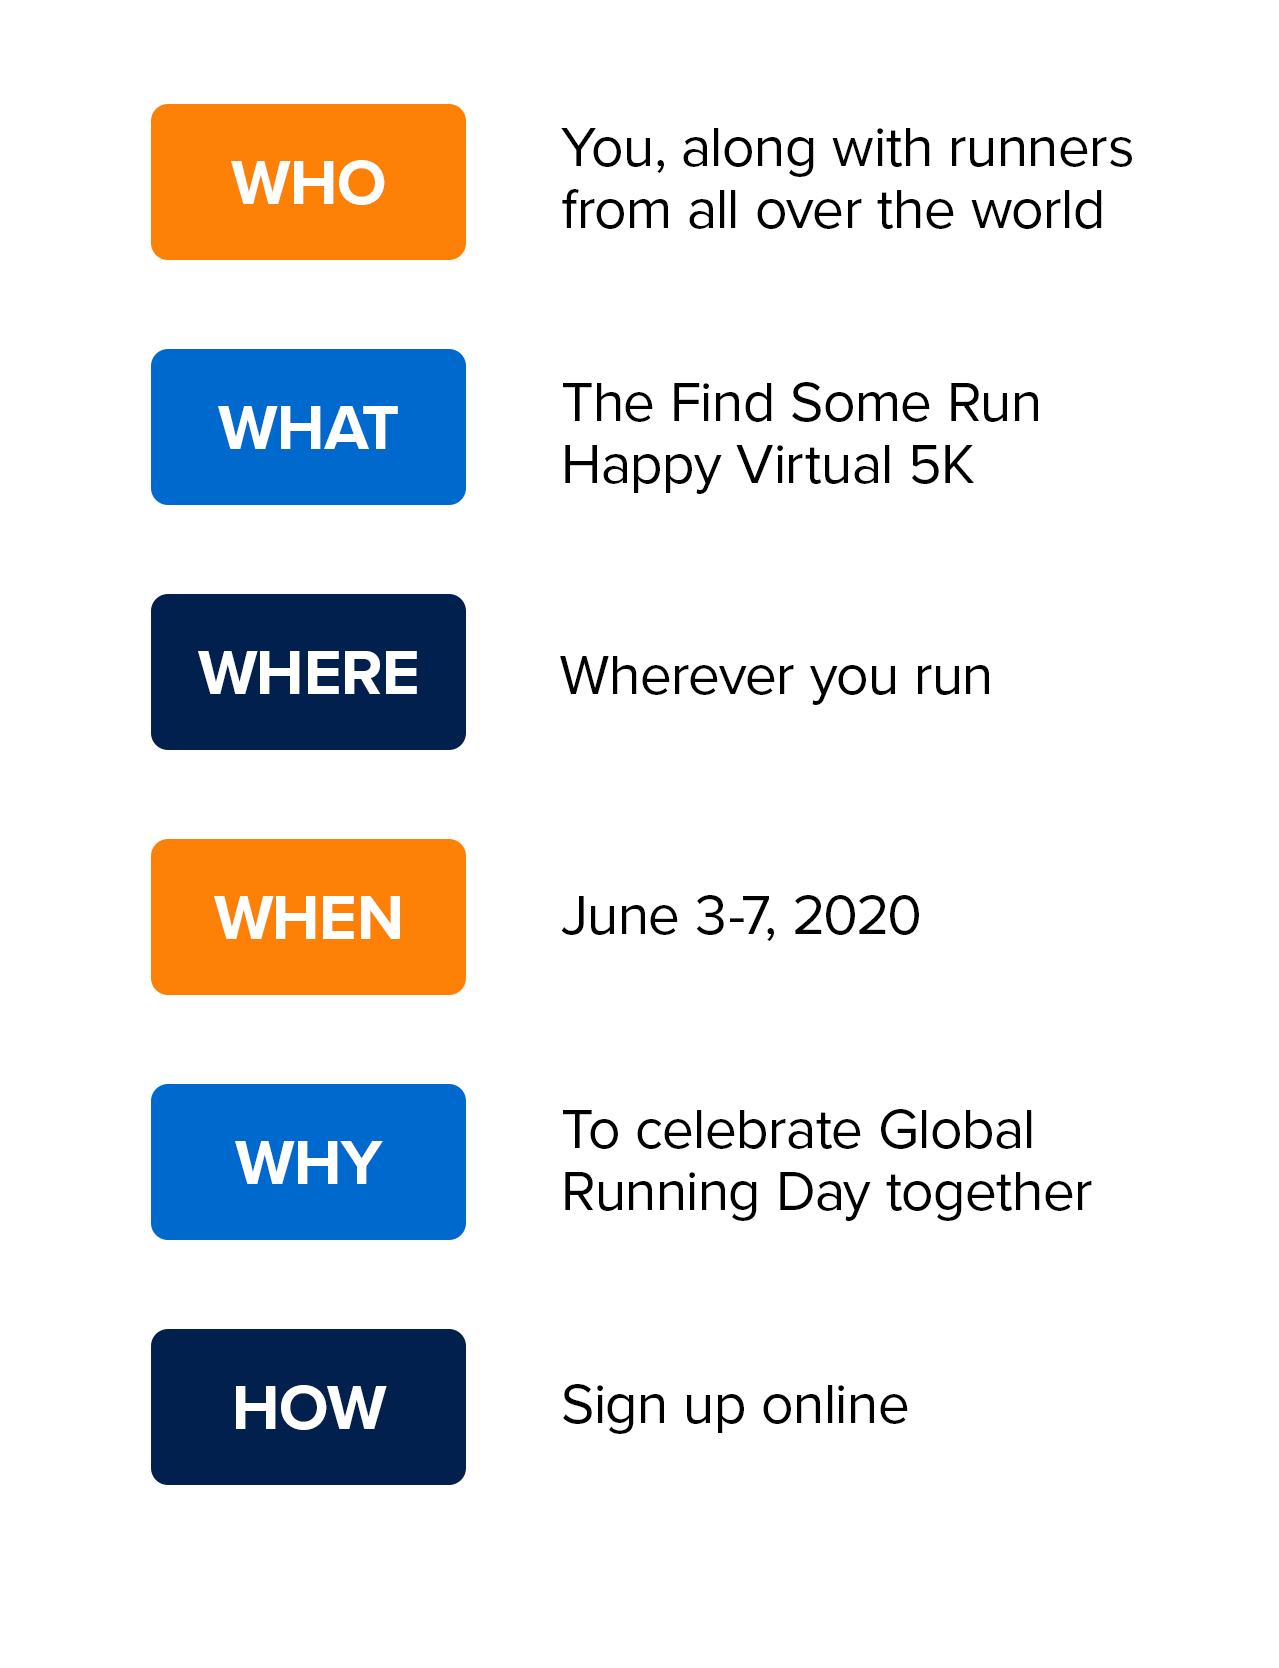 Who: You, along with runners from all over the world | What: The Find Some Run Happy Virtual 5K | Where: Wherever you run | When: June 3-7, 2020 | Why: To celebrate Global Running Day together | How: Sign up online